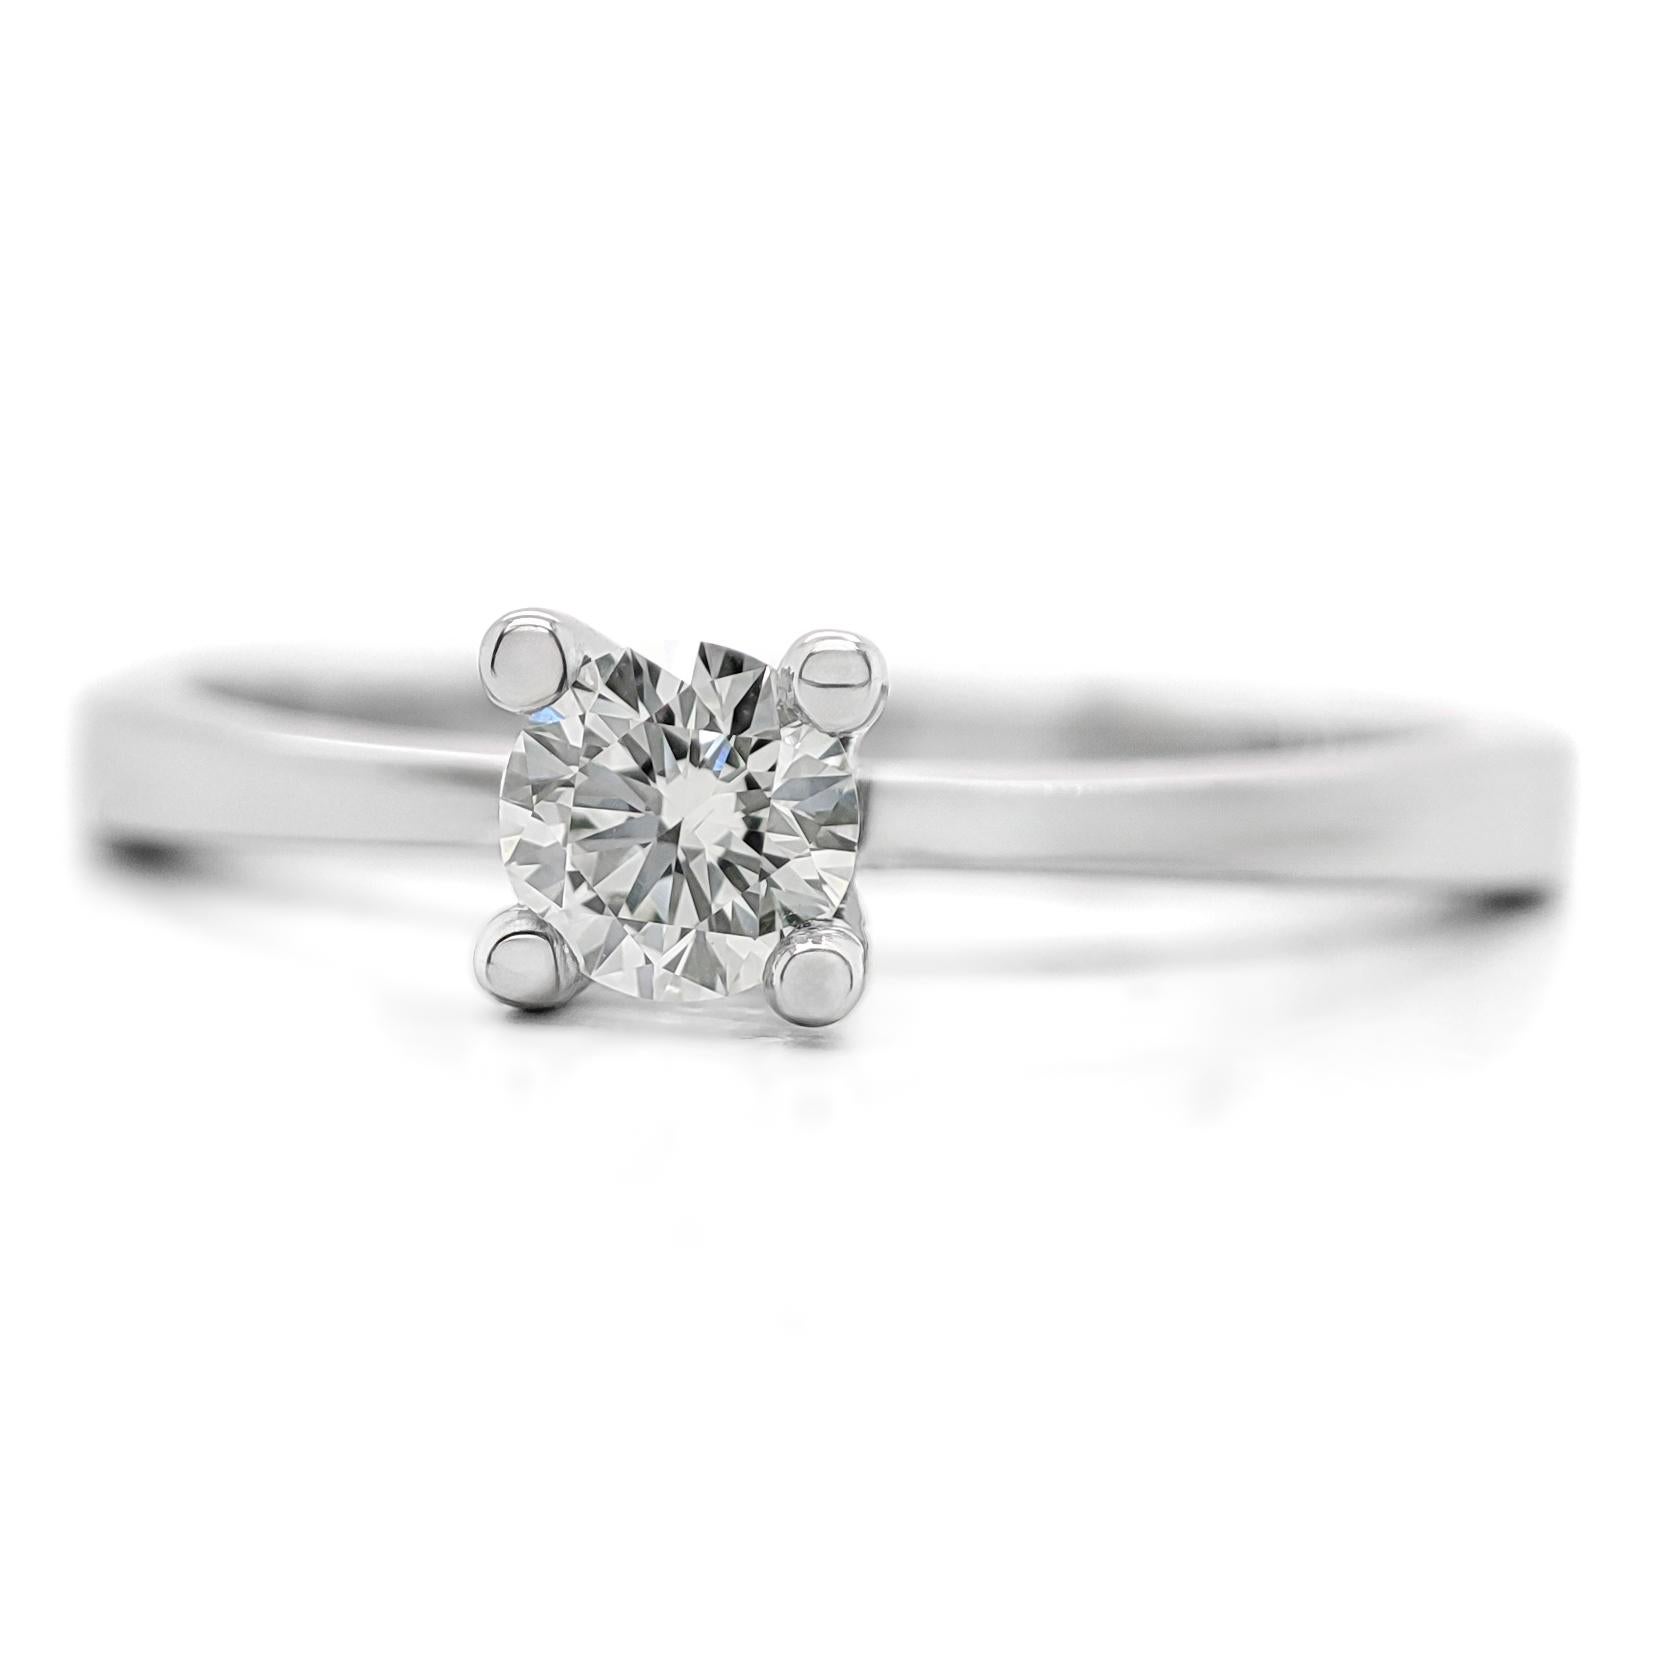 Round Cut NO RESERVE 0.20CT Round Diamond Solitaire Engagement Ring 18K White Gold For Sale